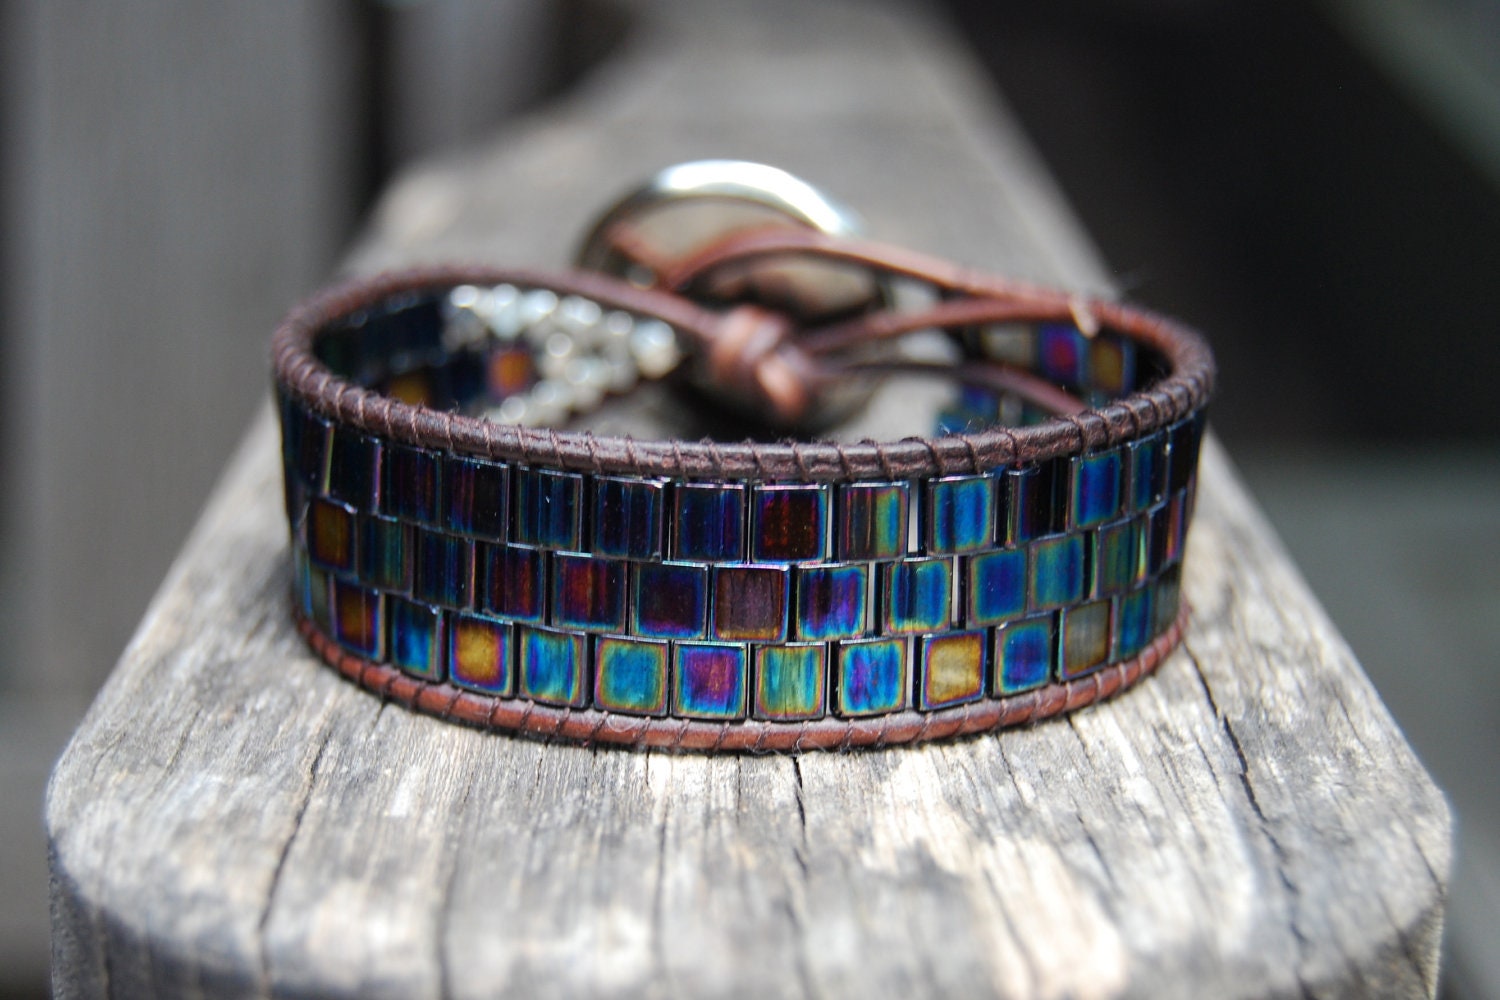 Wrapped Leather Bracelet with Metallic Blue / Purple / Turquoise Tila Beads, Silver Rondelles & Vintage Star Button - Shooting Star - MixNPatch